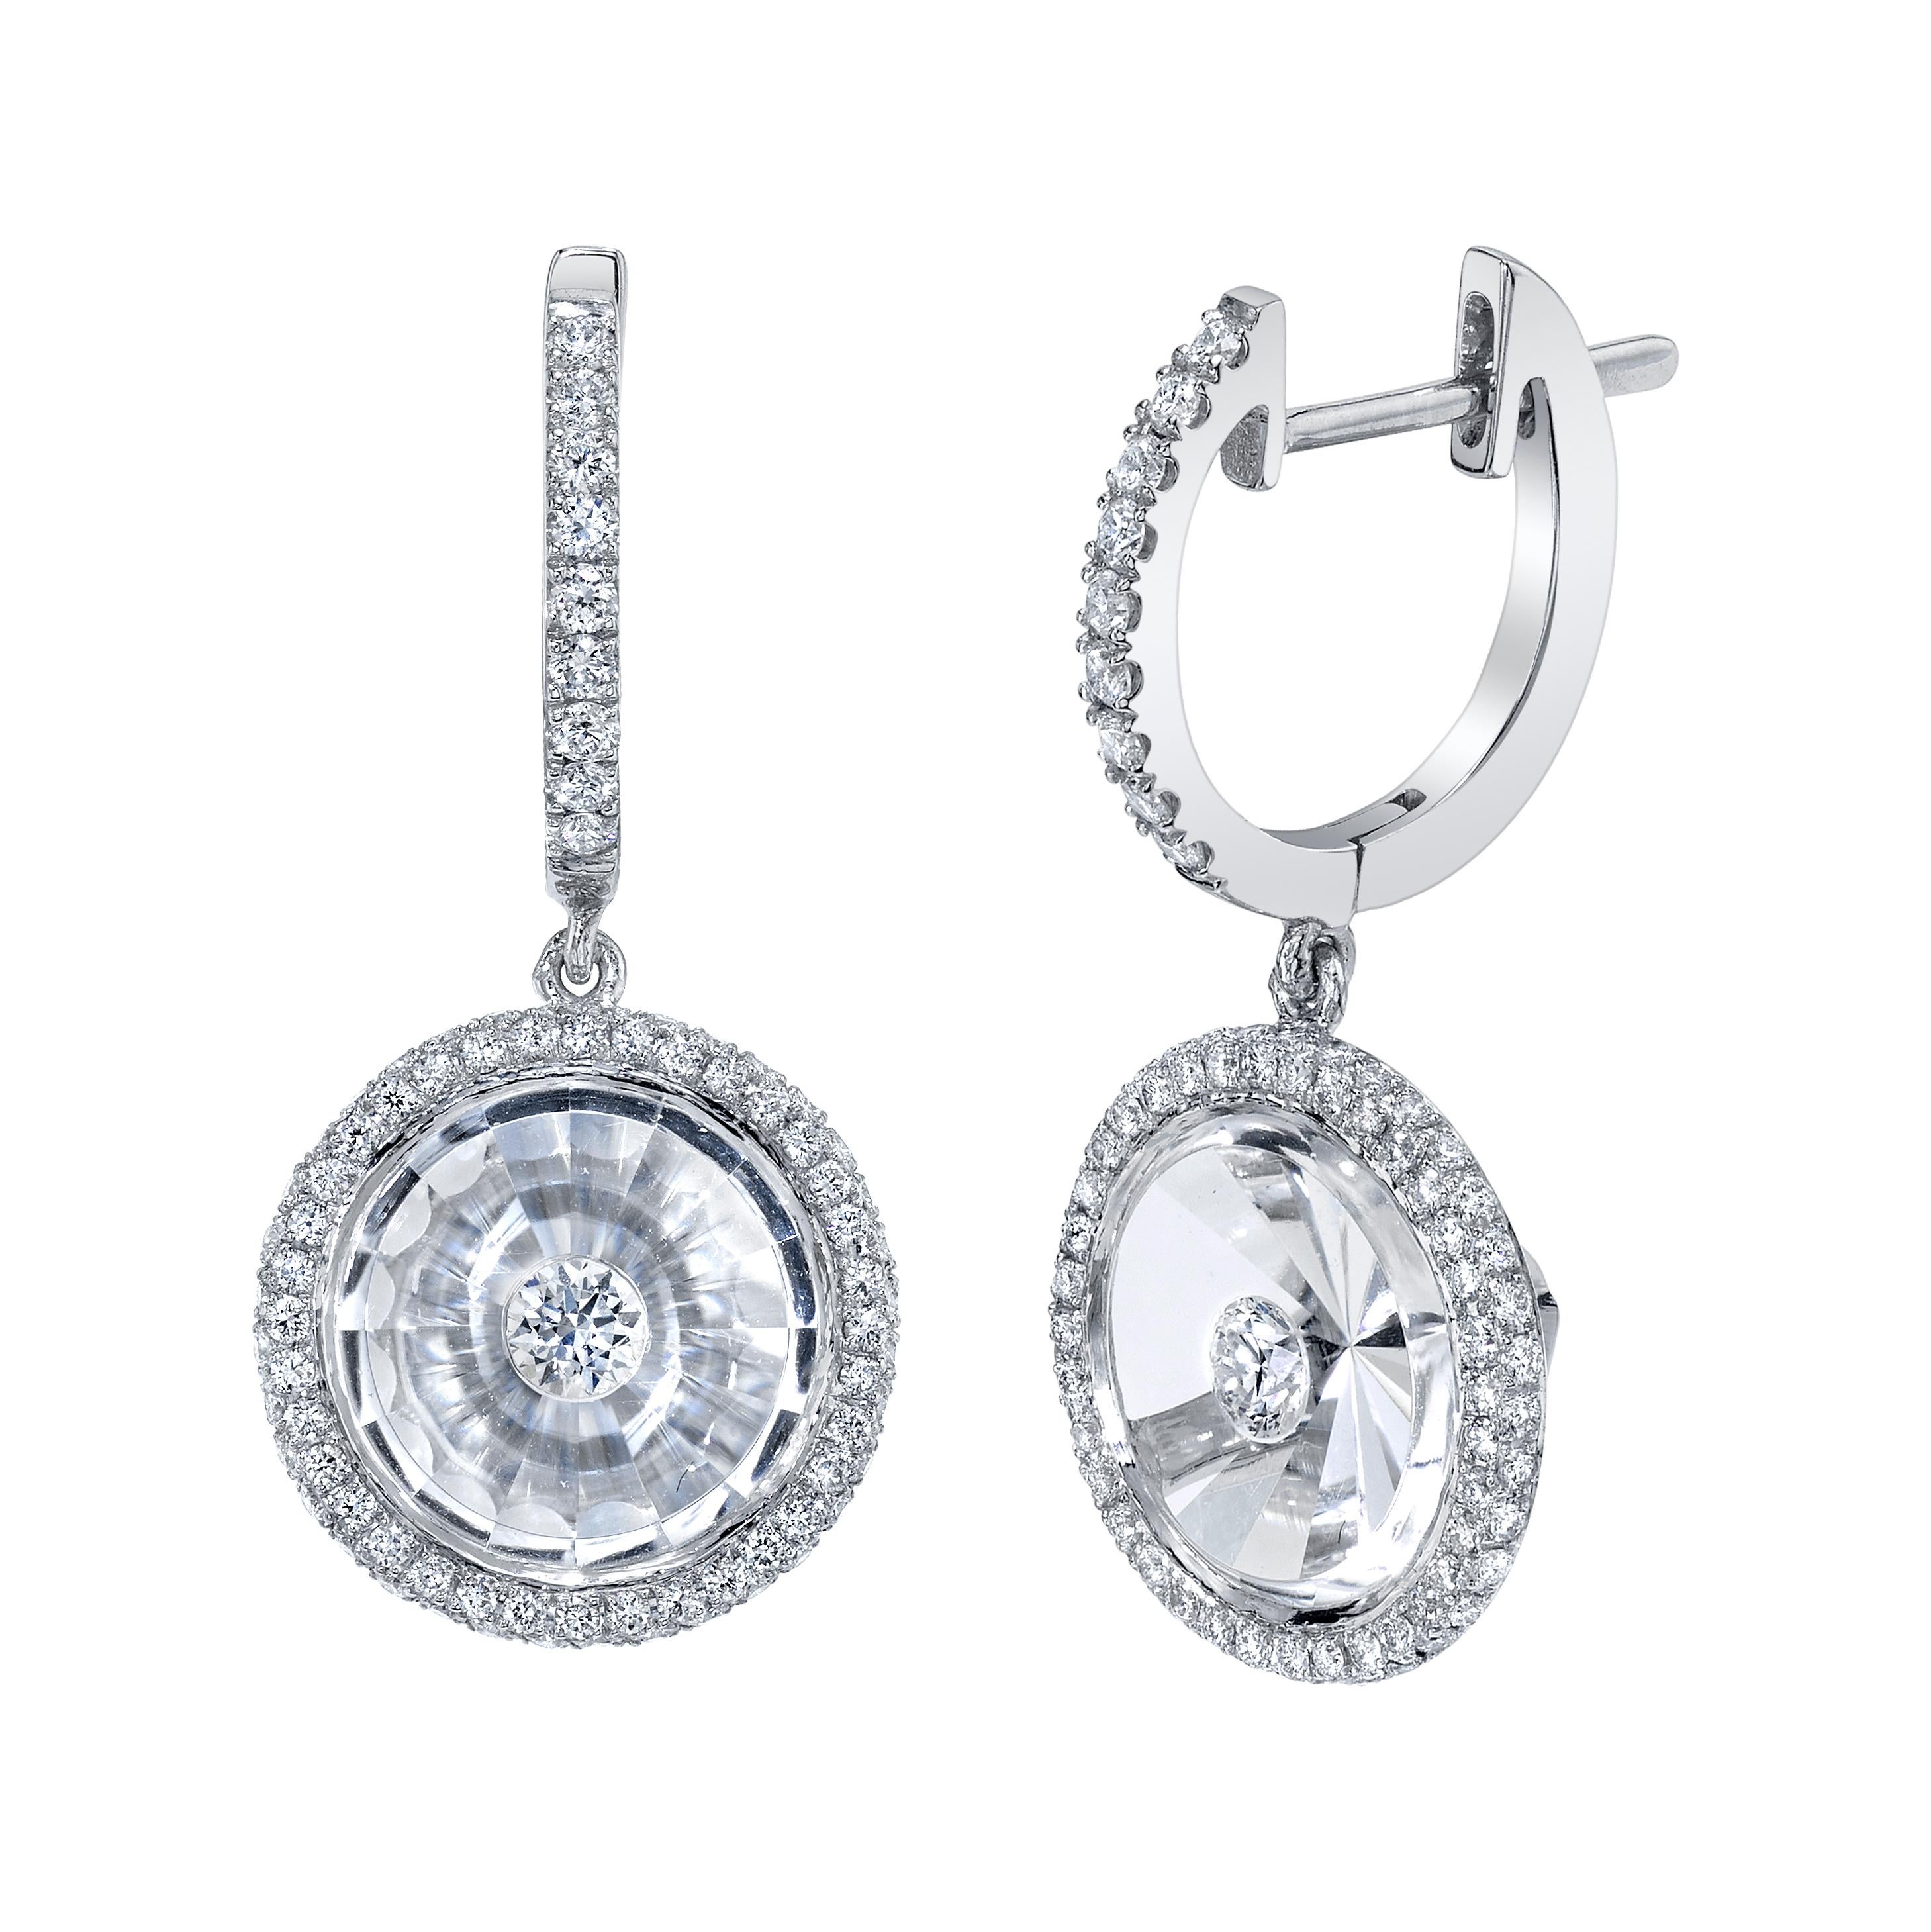 This earring is from our Bhansali Spirit collection, a collection inspired by cocktails. Faceted from the back by hand, the 
white quartz (4.73cts) creates a shiny pinwheel shimmer that is sassy, flirty, and fun! With a pave diamond halo and diamond